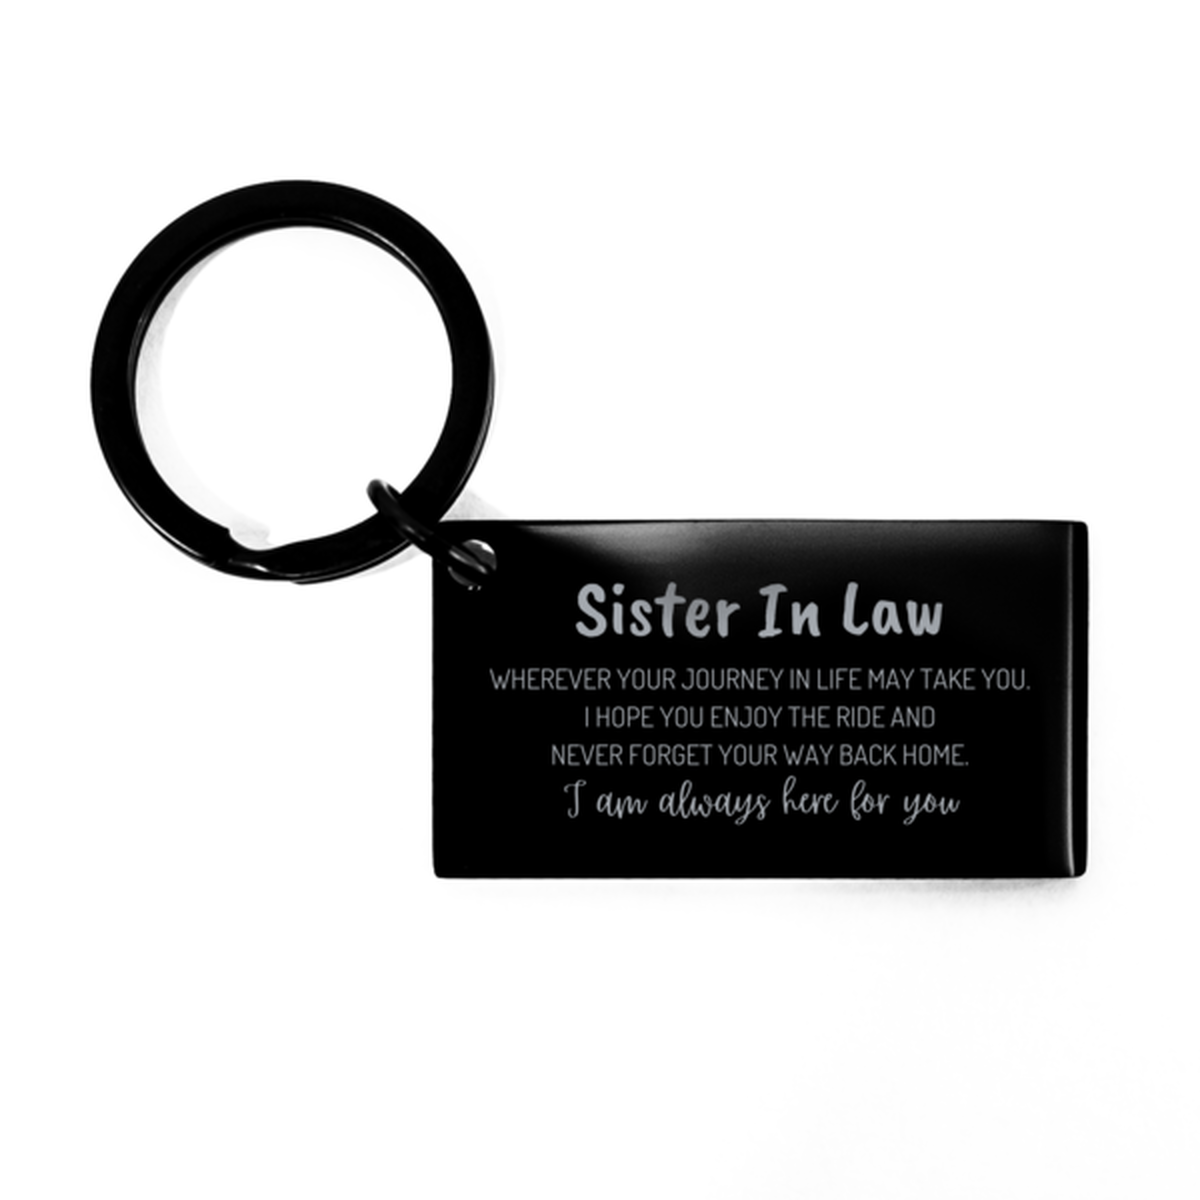 Sister In Law wherever your journey in life may take you, I am always here for you Sister In Law Keychain, Awesome Christmas Gifts For Sister In Law, Sister In Law Birthday Gifts for Men Women Family Loved One